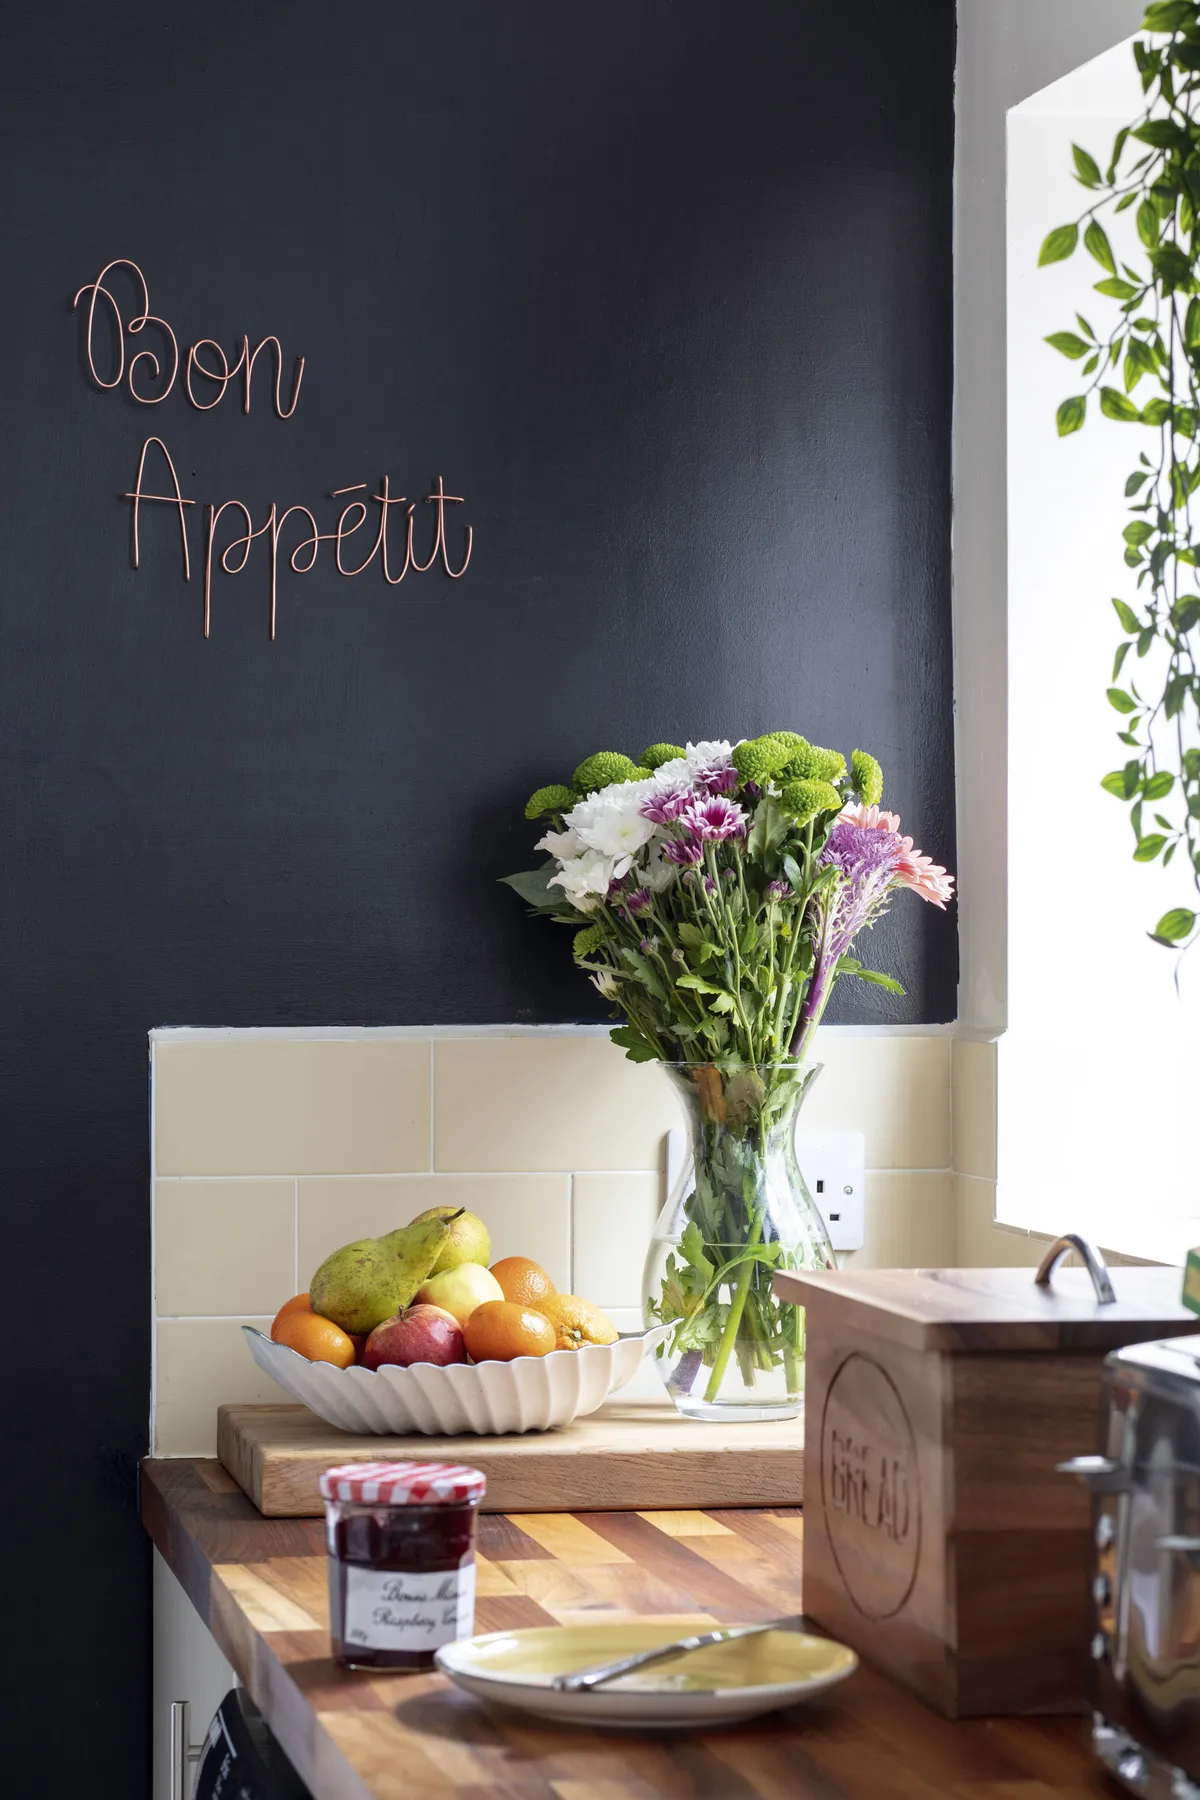 ‘We painted a wall black to create the look of a chalkboard,’ says Diandra, using Durable Liberty by GoodHome at B&Q. Copper art from Let’s Be Wired pops with the black wall behind it